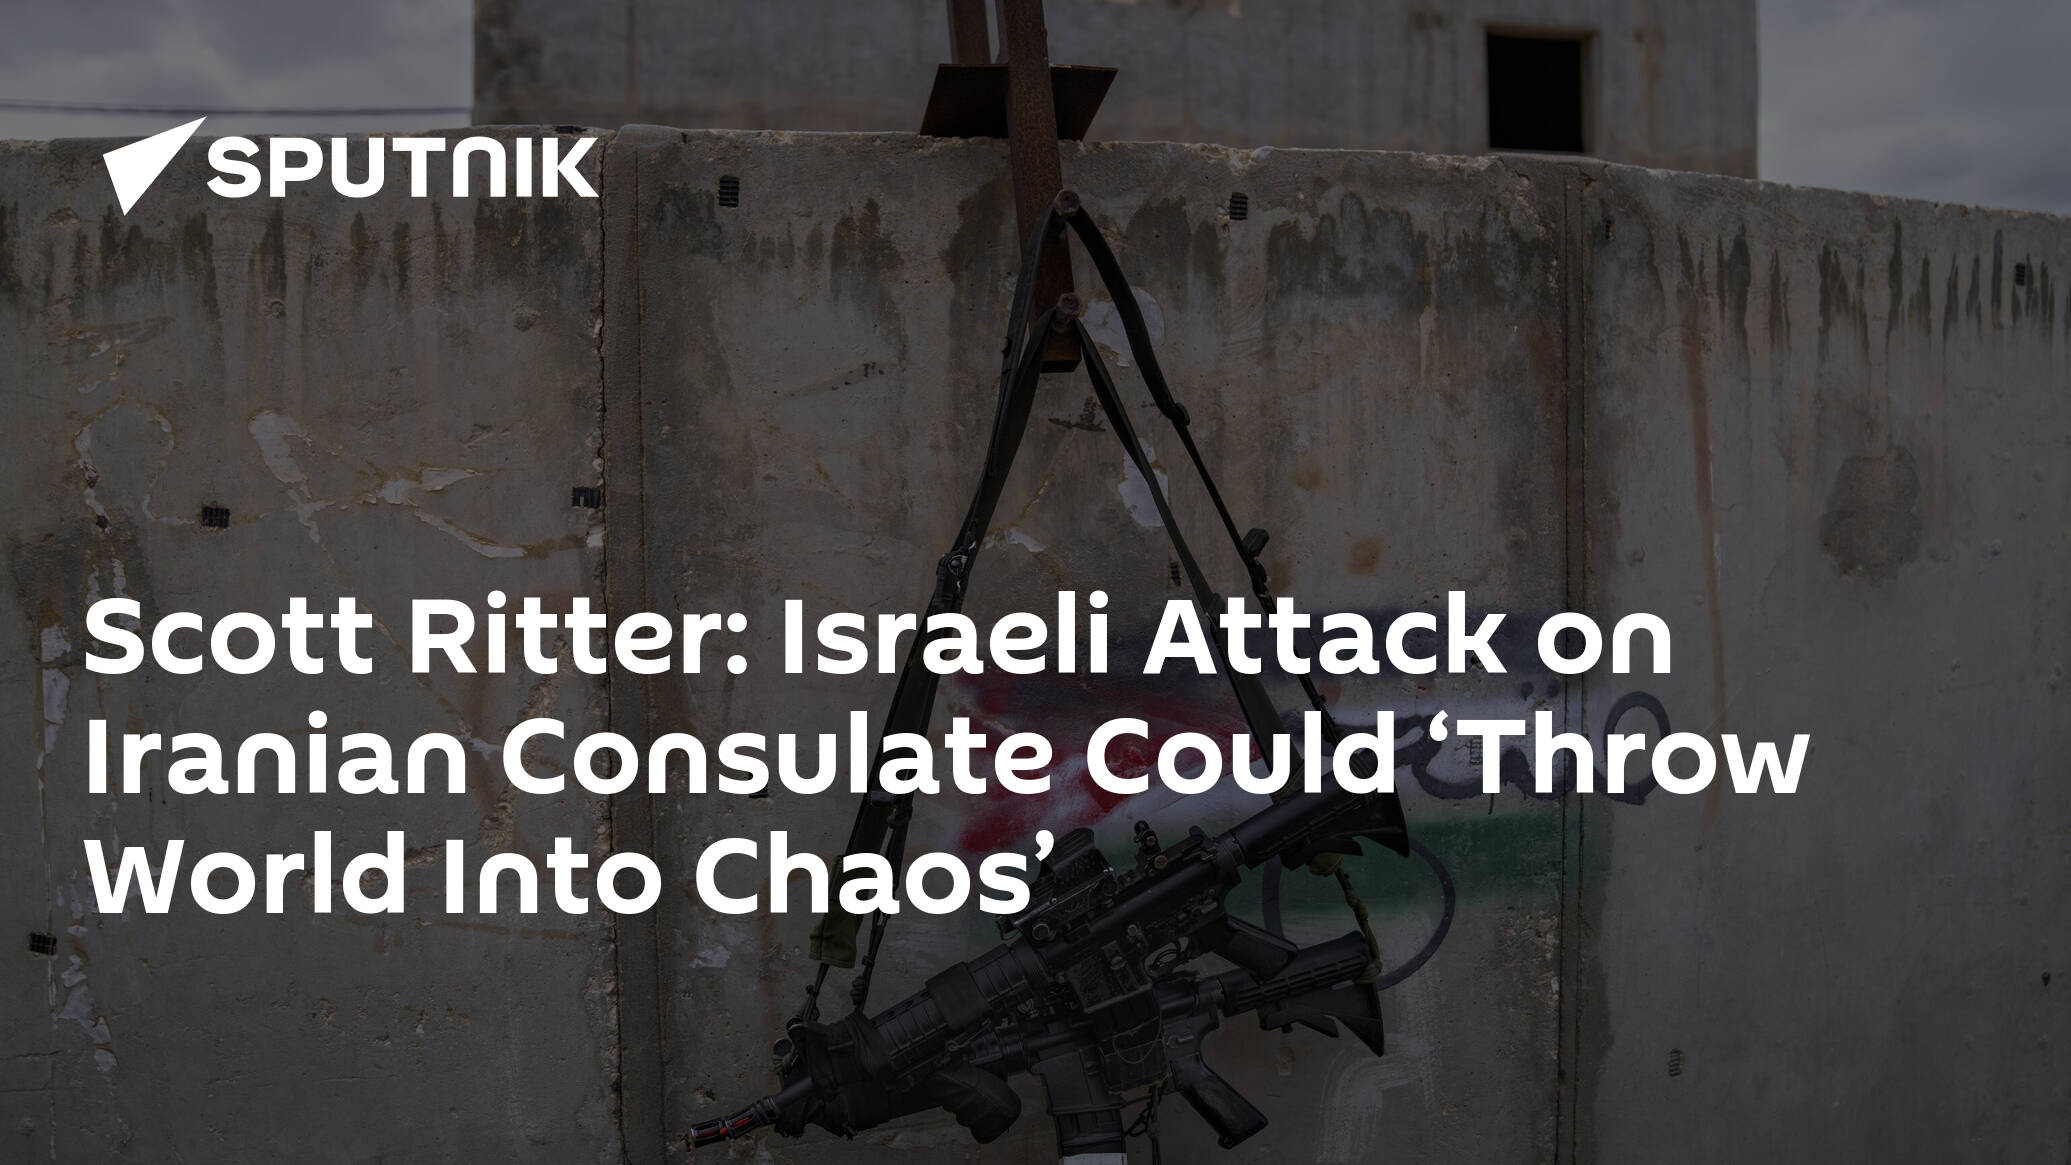 Scott Ritter: Israeli Attack on Iranian Consulate Could ‘Throw World Into Chaos’